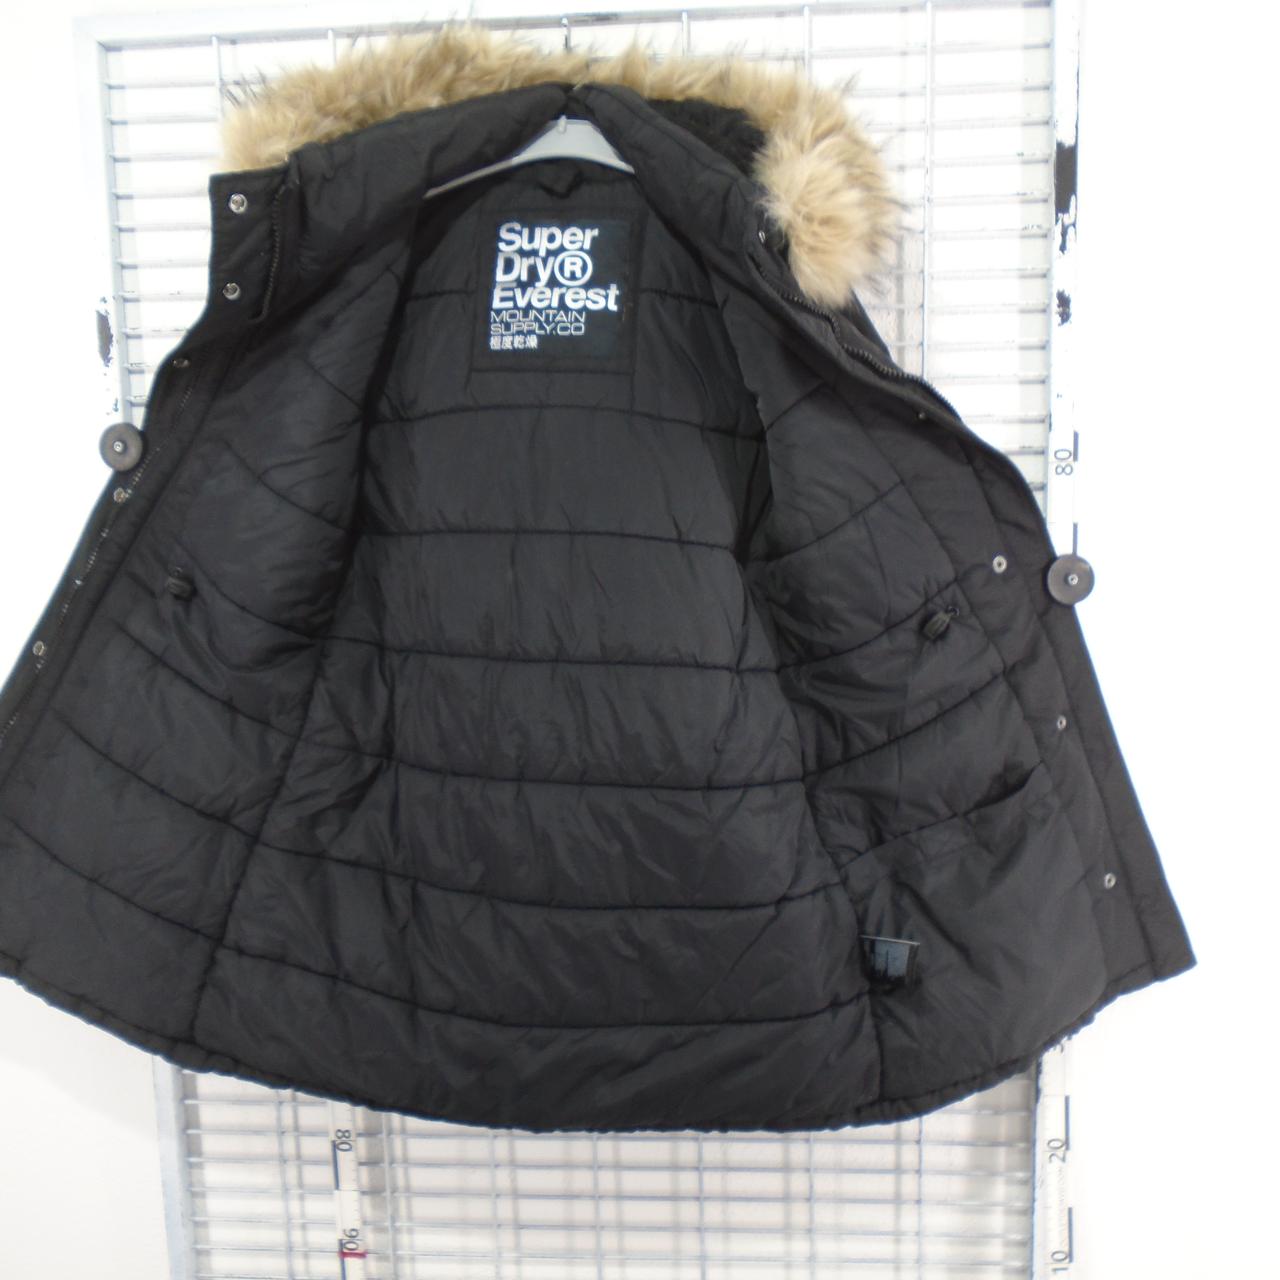 Women's Parka Superdry. Black. M. Used. Very good